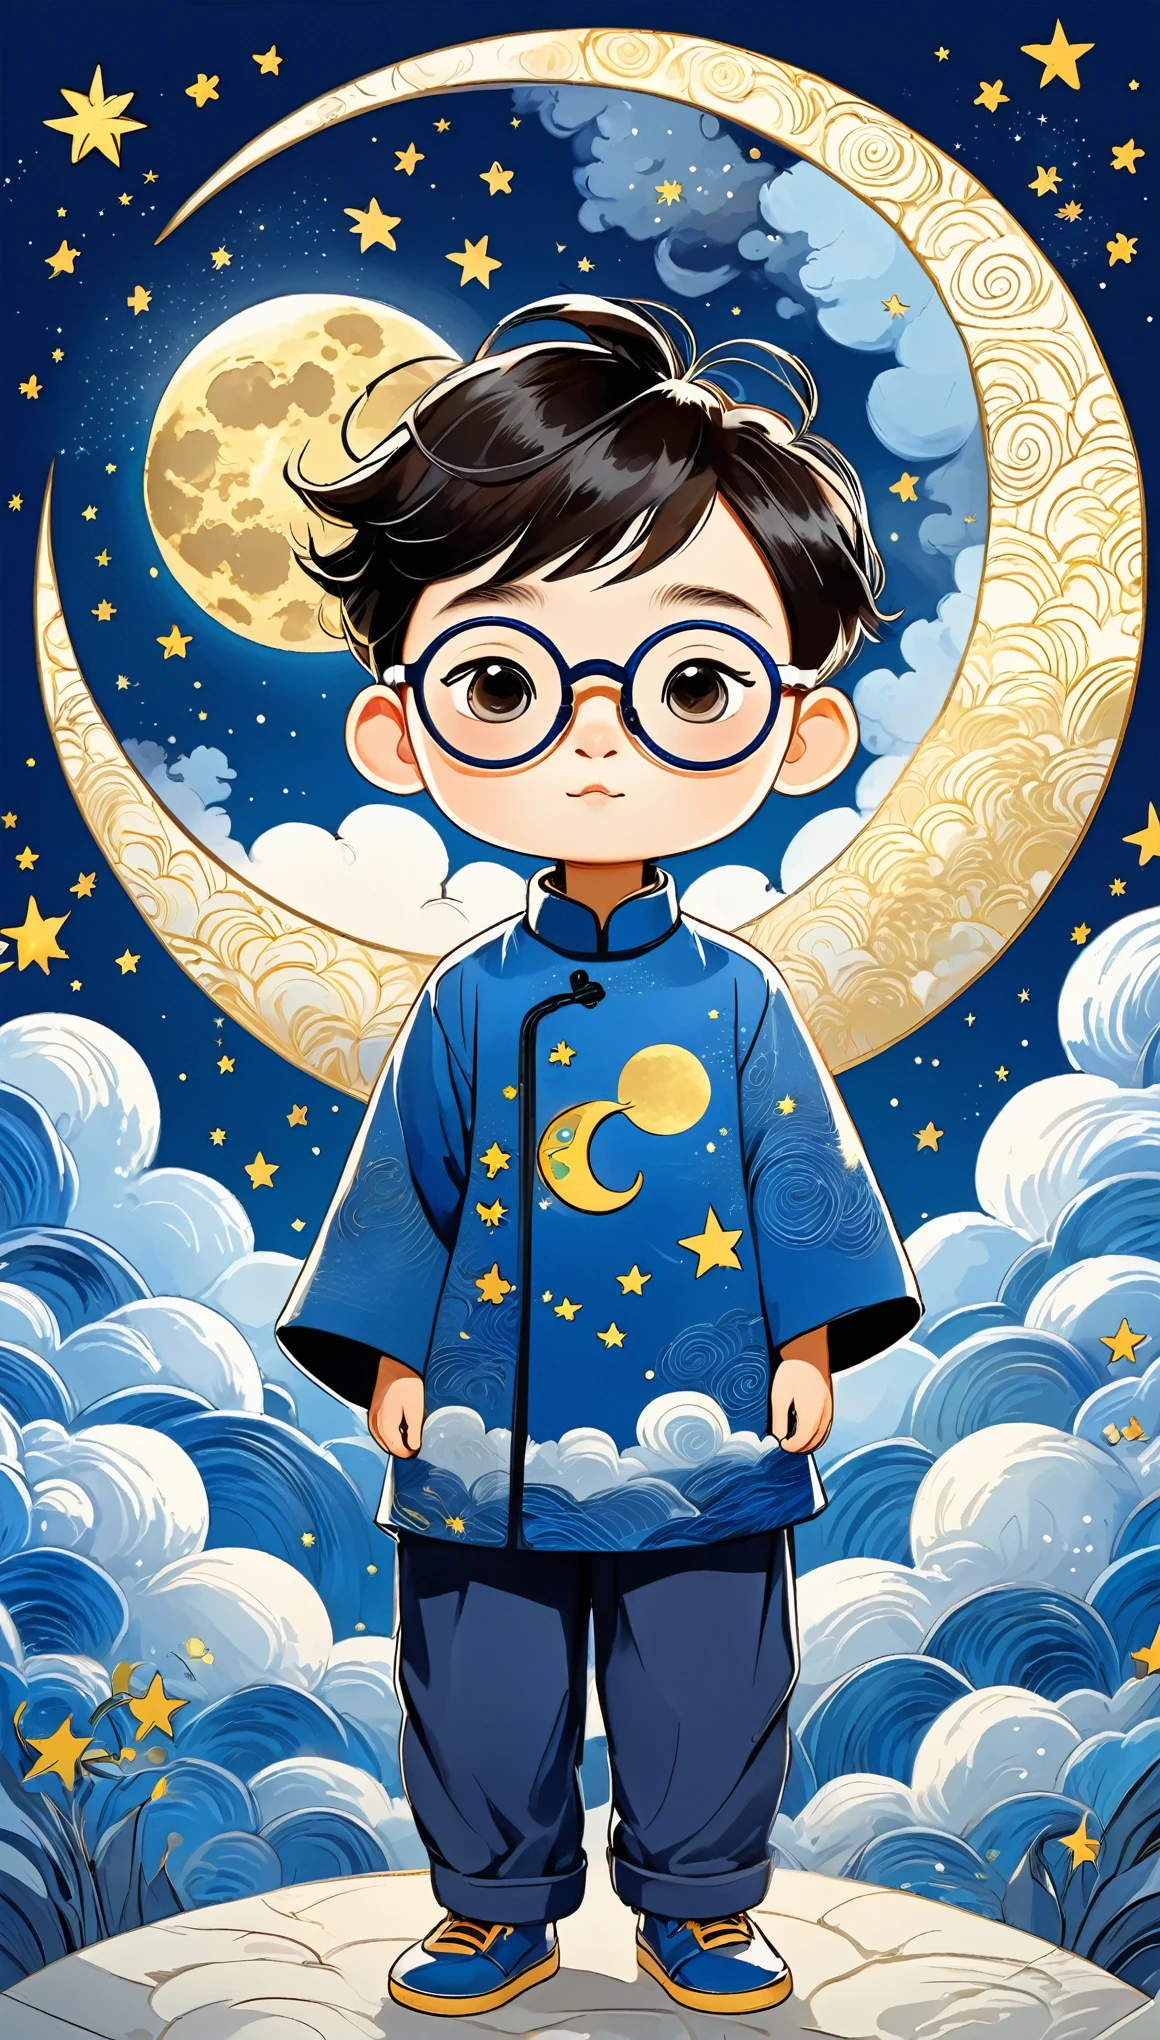 Cartoon Animation，Hand-drawn style：Rough Texture，（1 Boy，Unique，Baldhead，Round glasses。）Cloud，Star，moon，dragon，Beautiful details，Texture，Blue and gold，Integrating into the art of Van Gogh，Layered art，Lines winding
